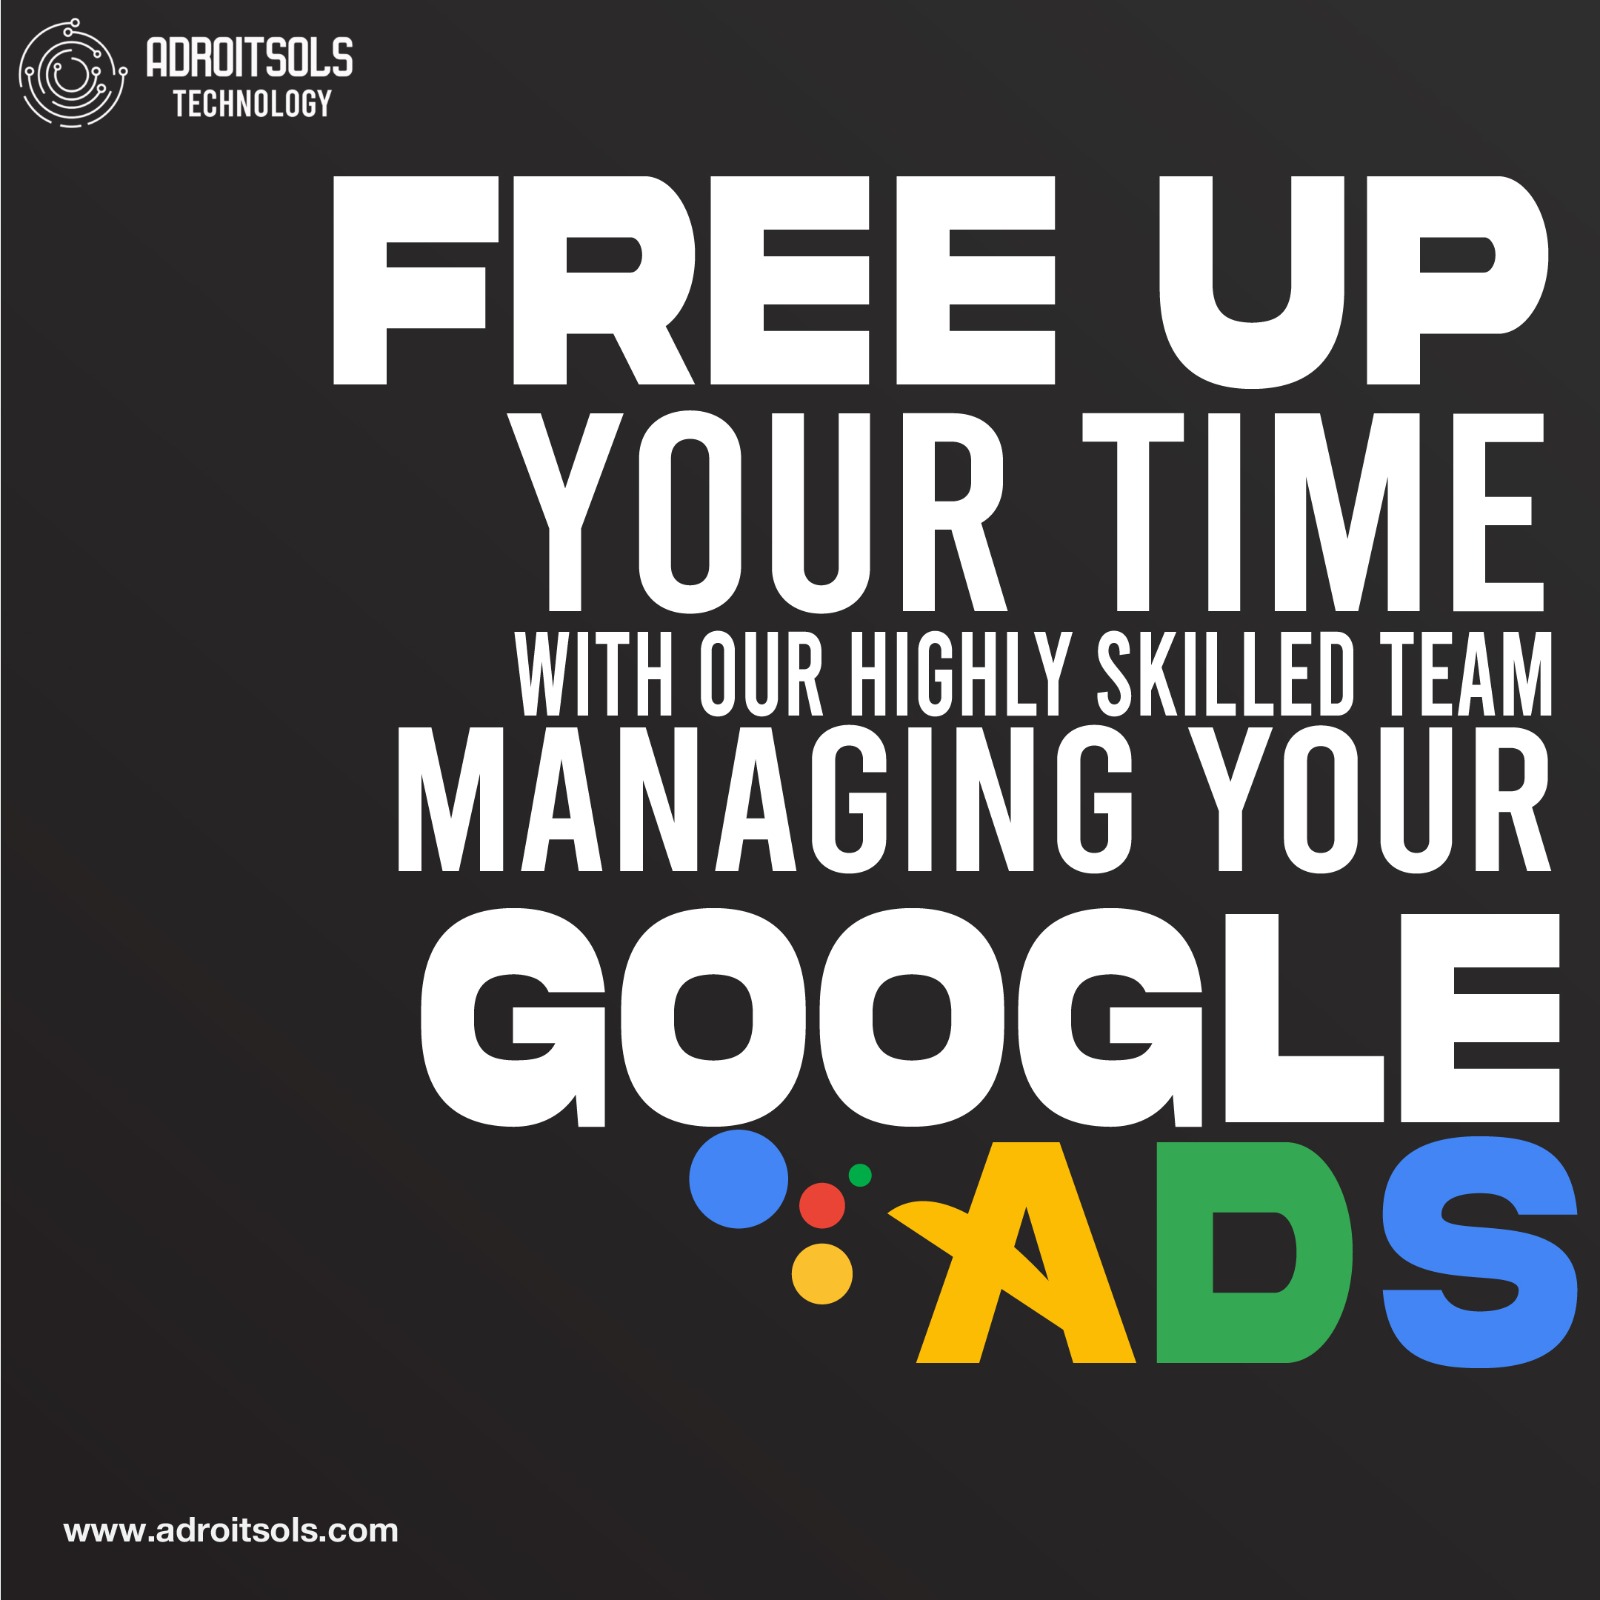 Google Paid Ads in UK | Adroitsols Technology | Your Trusted IT Partner across the US